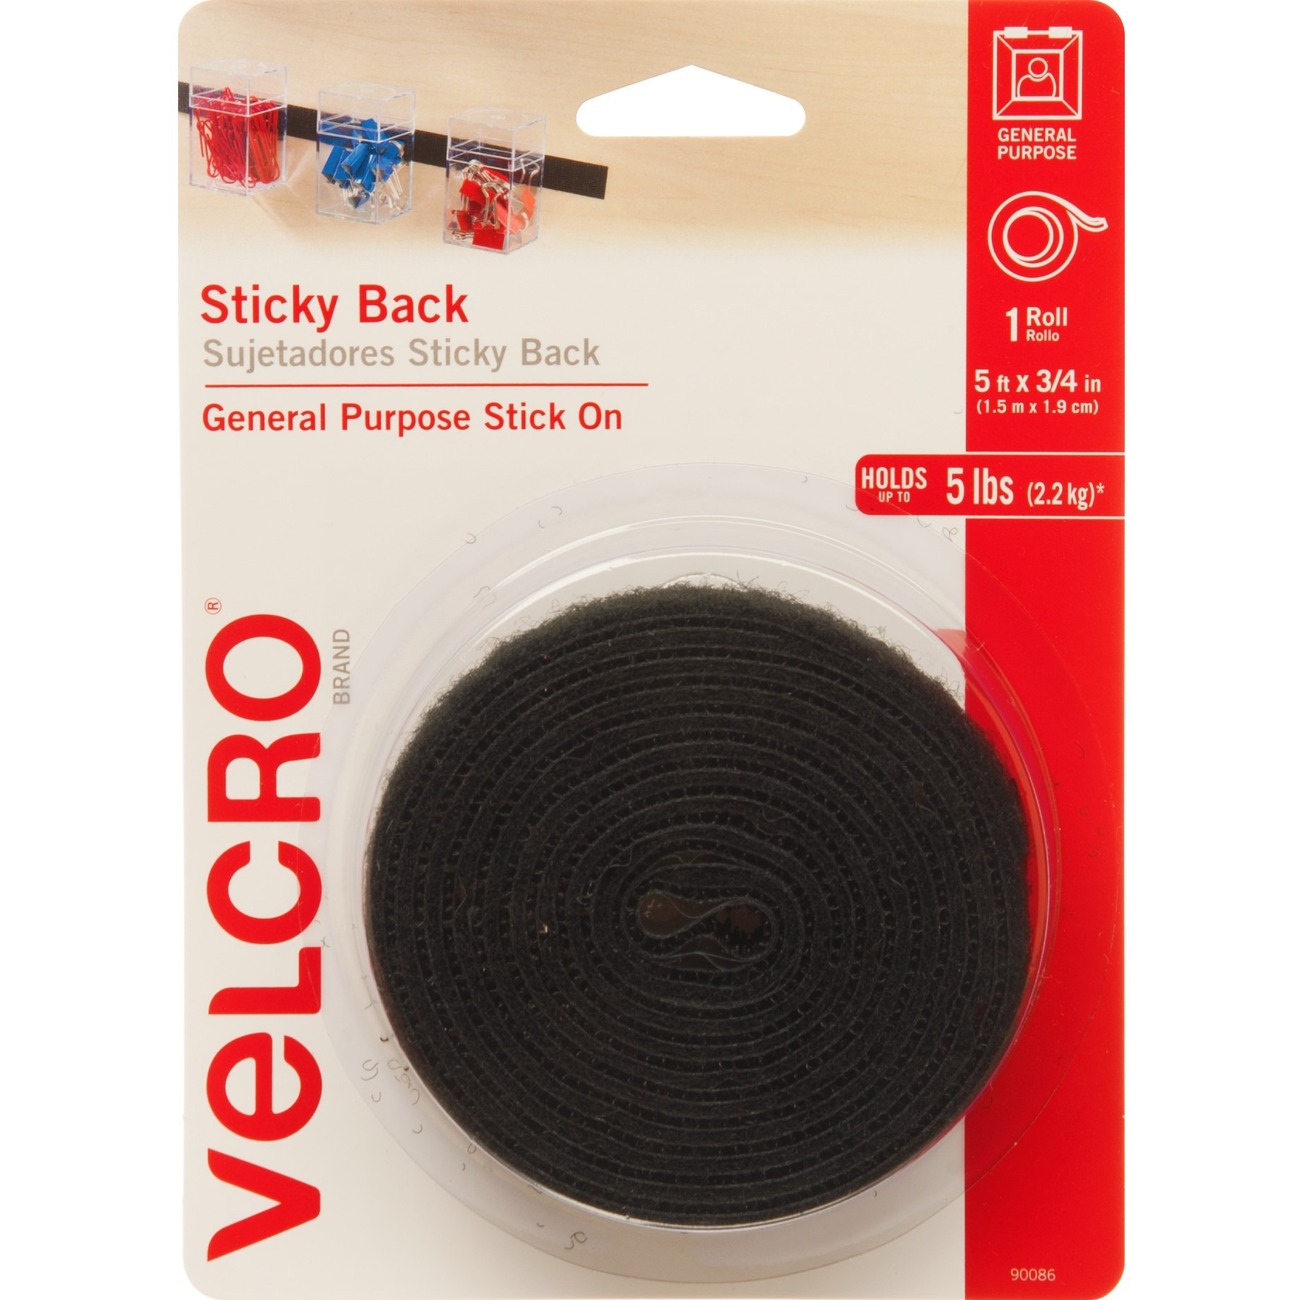 VELCRO 15 ft. x 2 in. Industrial Strength Tape 90198 - The Home Depot